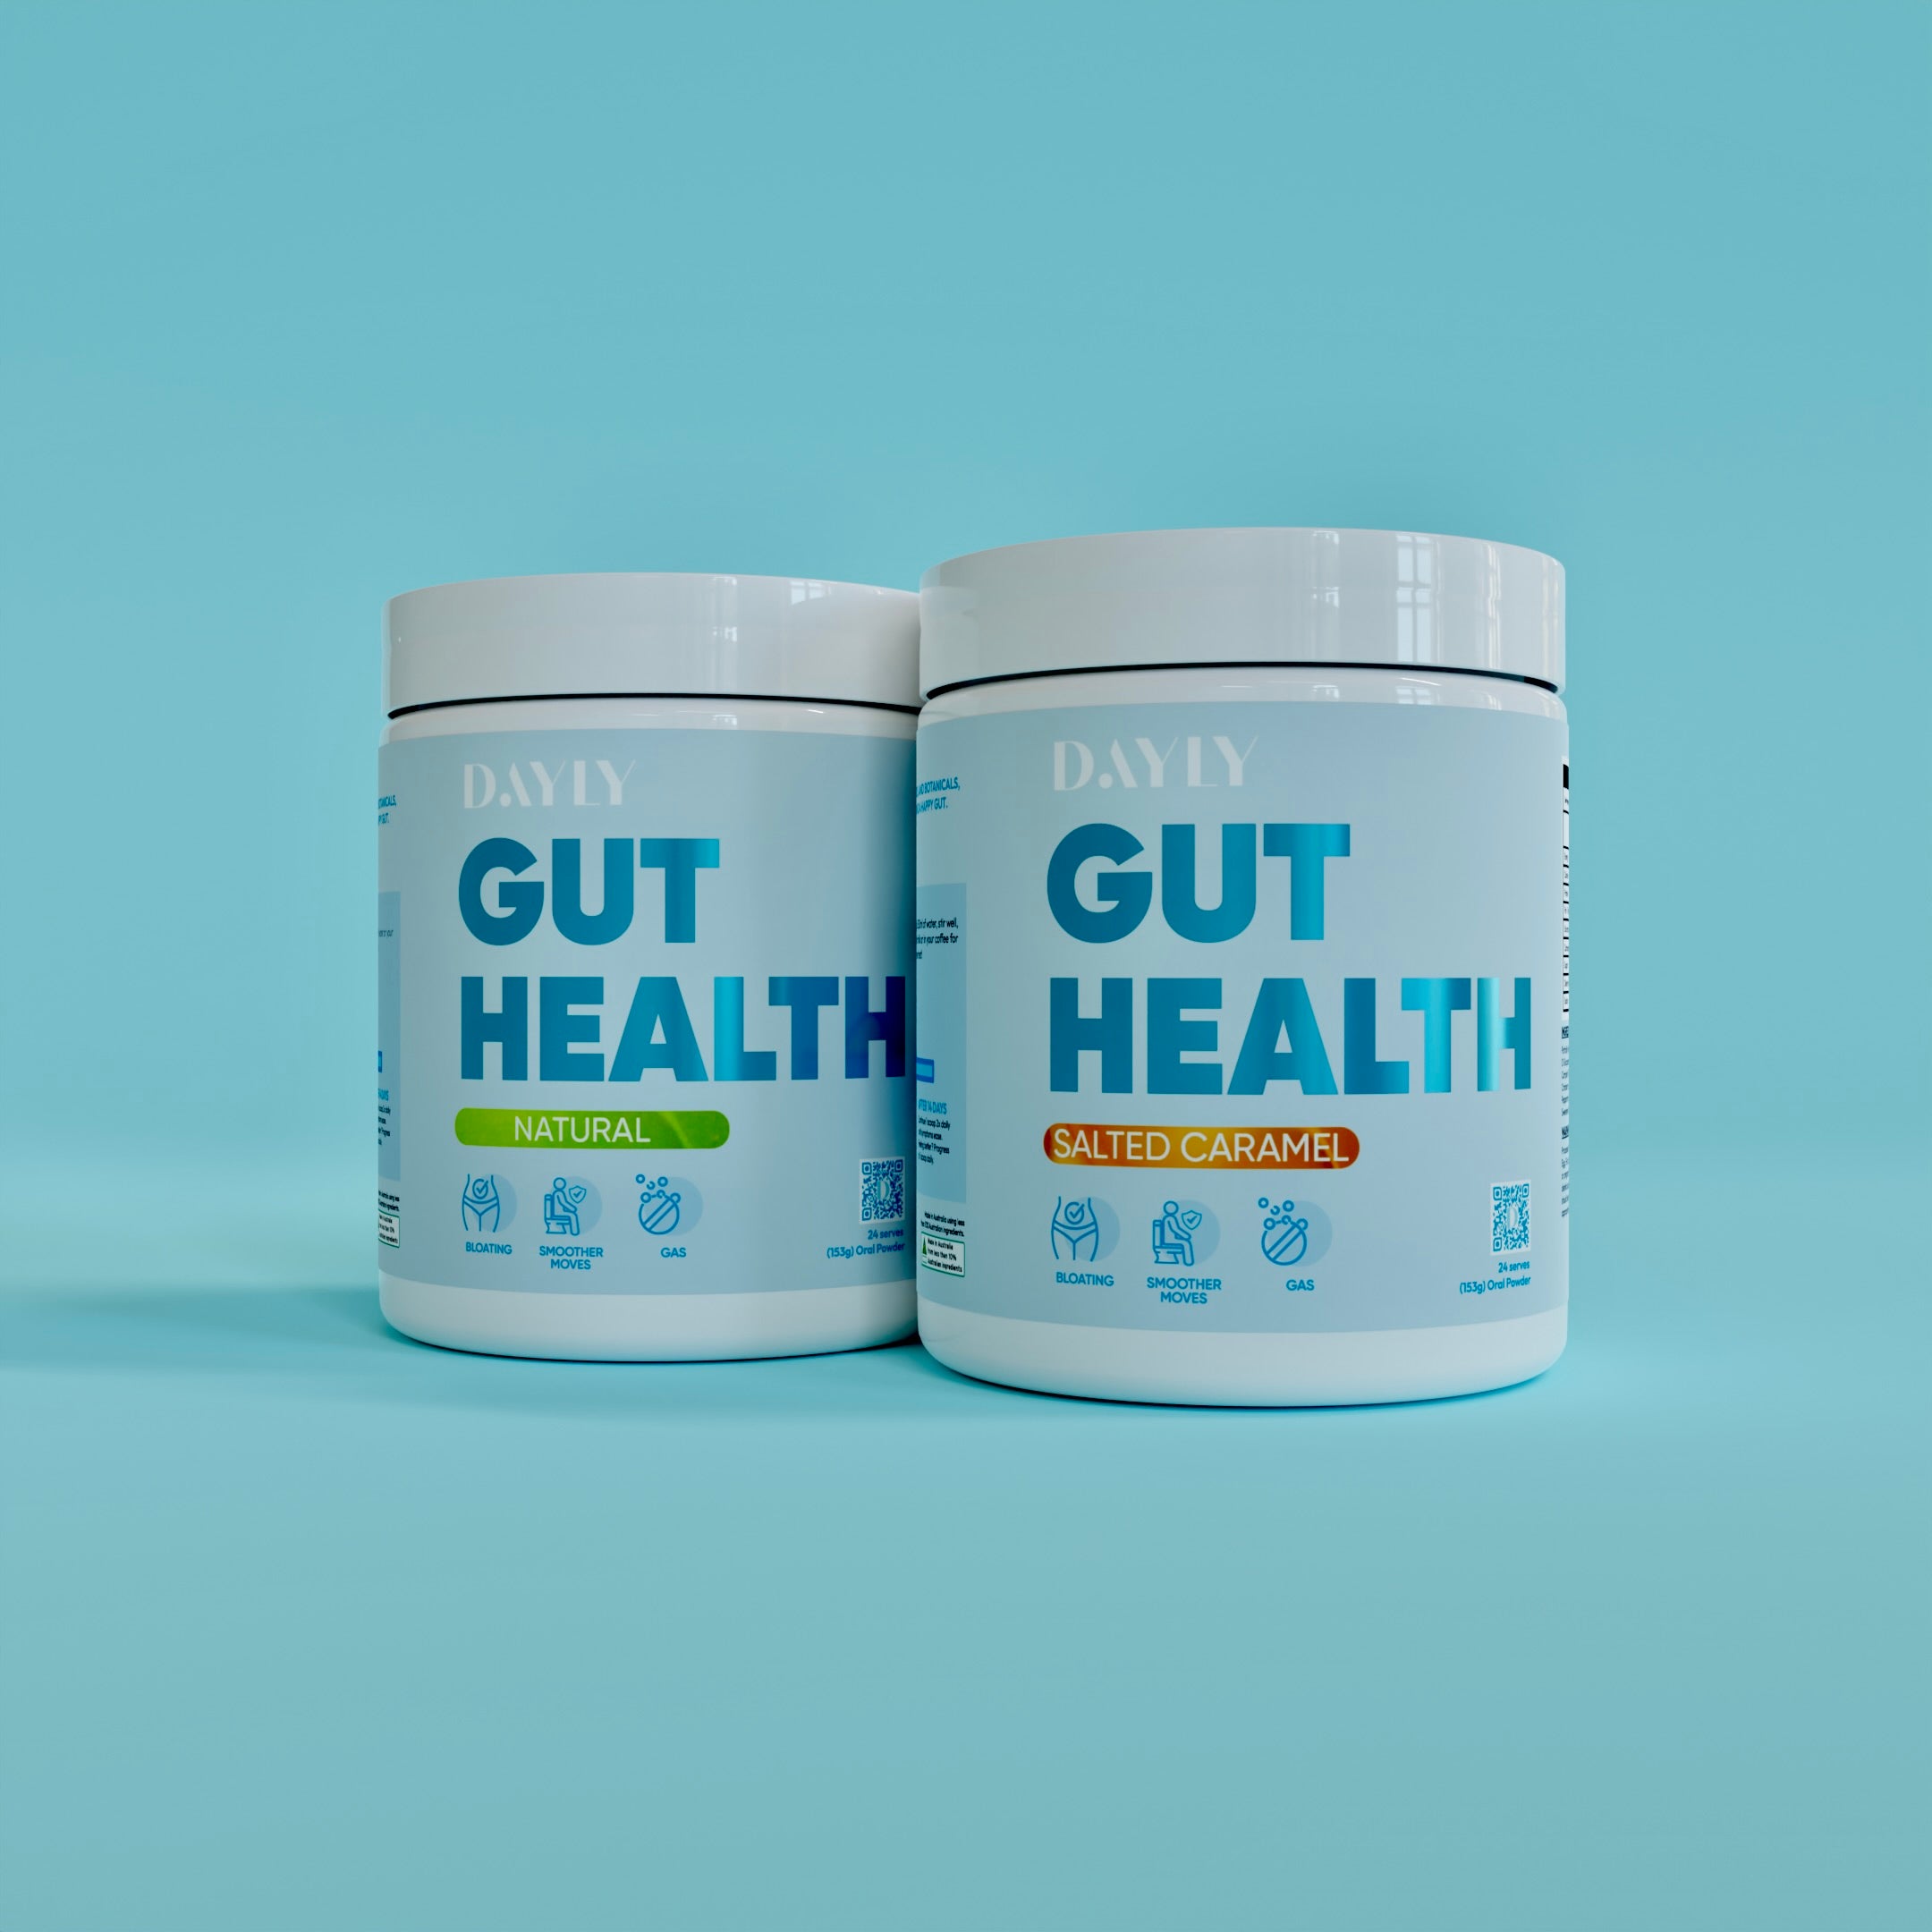 Natural and salted caramel DAYLY Gut Health bundle displayed on a vibrant blue background